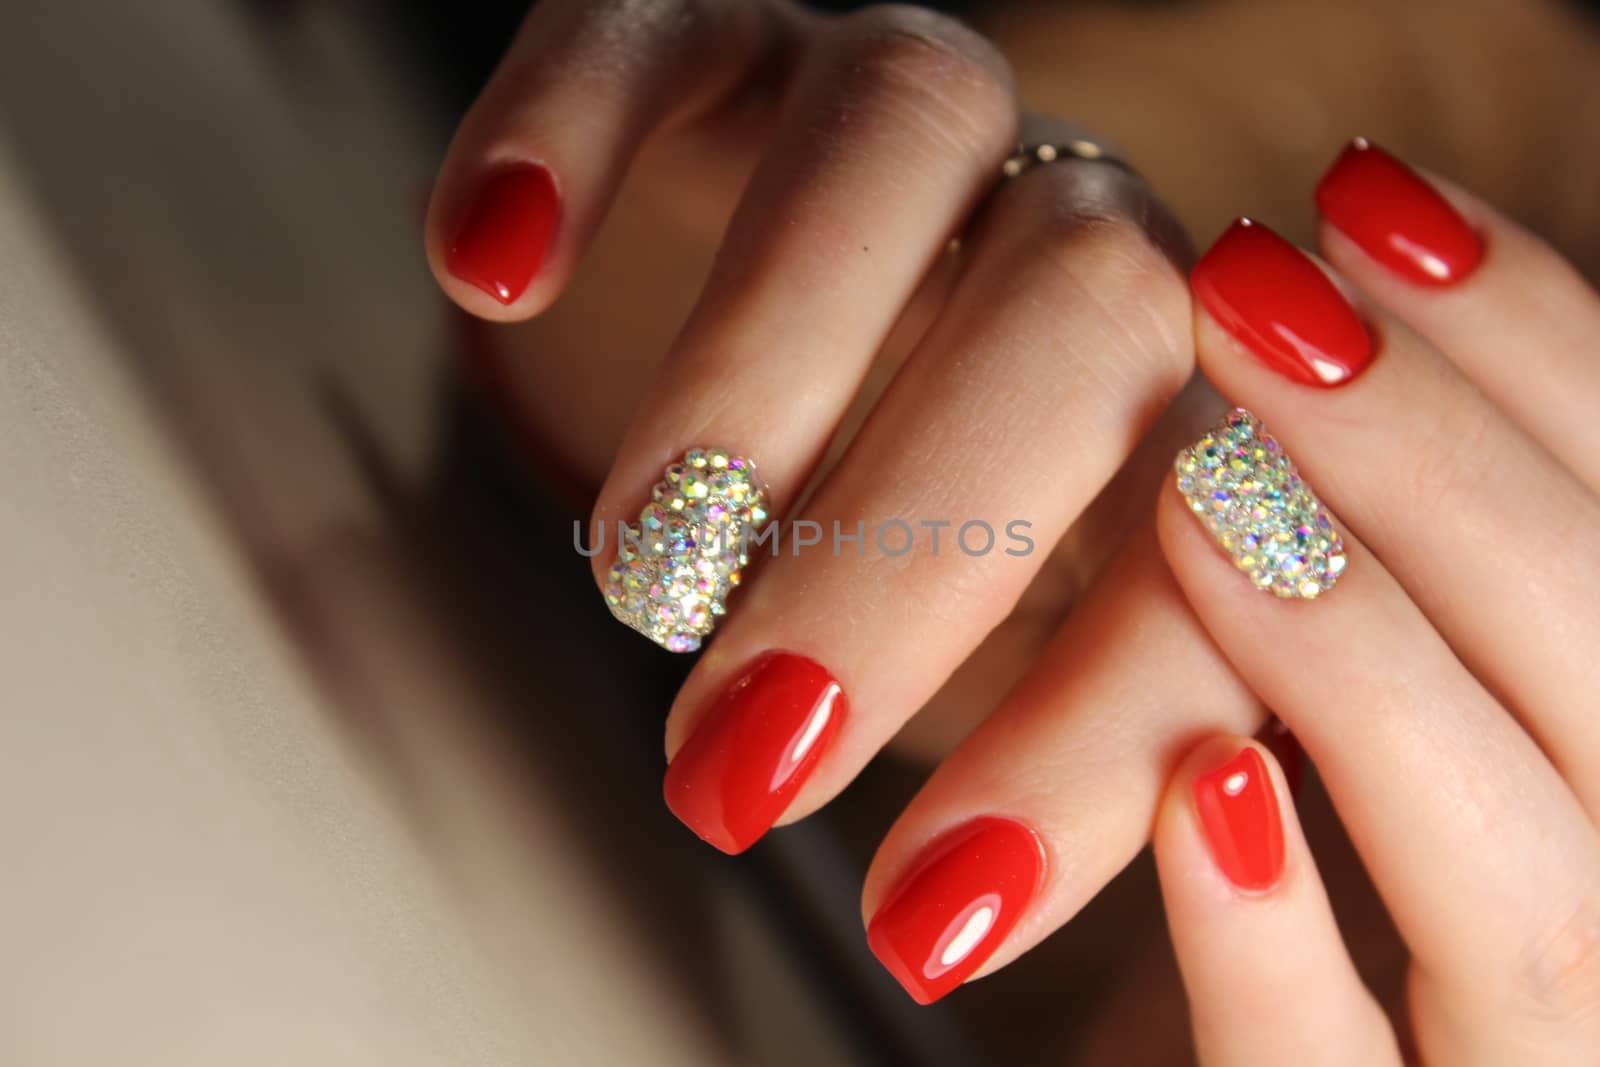 Manicure design is bright red and rhinestones by SmirMaxStock